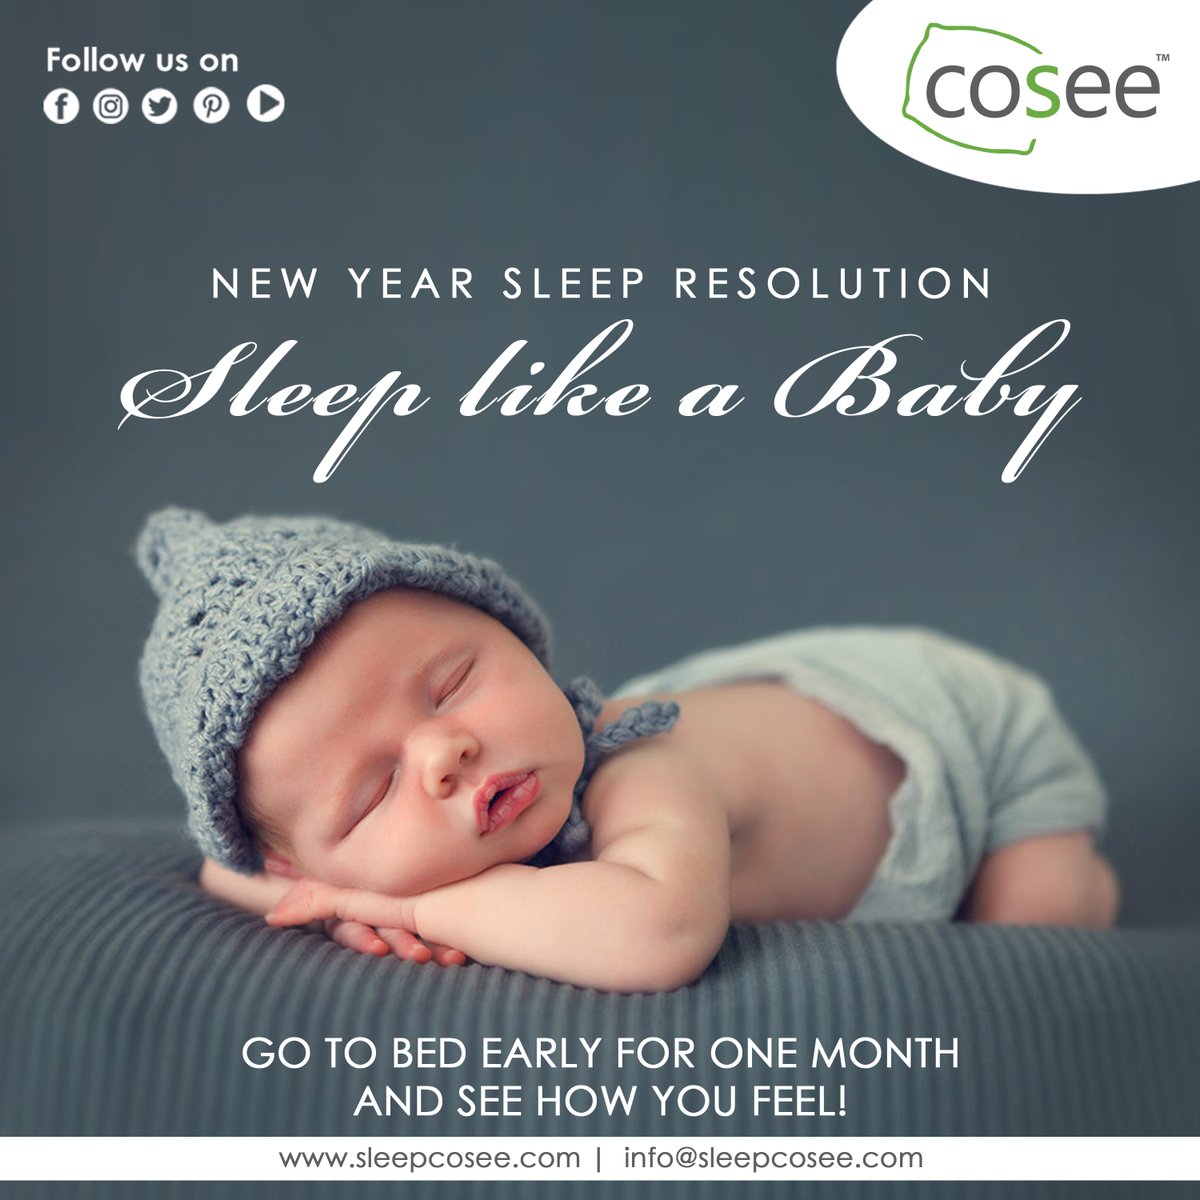 Want the deep, restful sleep of a child? Then put yourself to bed like a toddler!
Ever slept like a child?
or like a boss? 
or like a queen?
or like an angel?
or like a pro?
Comment your answer!
.
.
.
.
.
#SleepCosee #SleepGears #newyearresolution2022 #babysleep #sleeplikeaboss